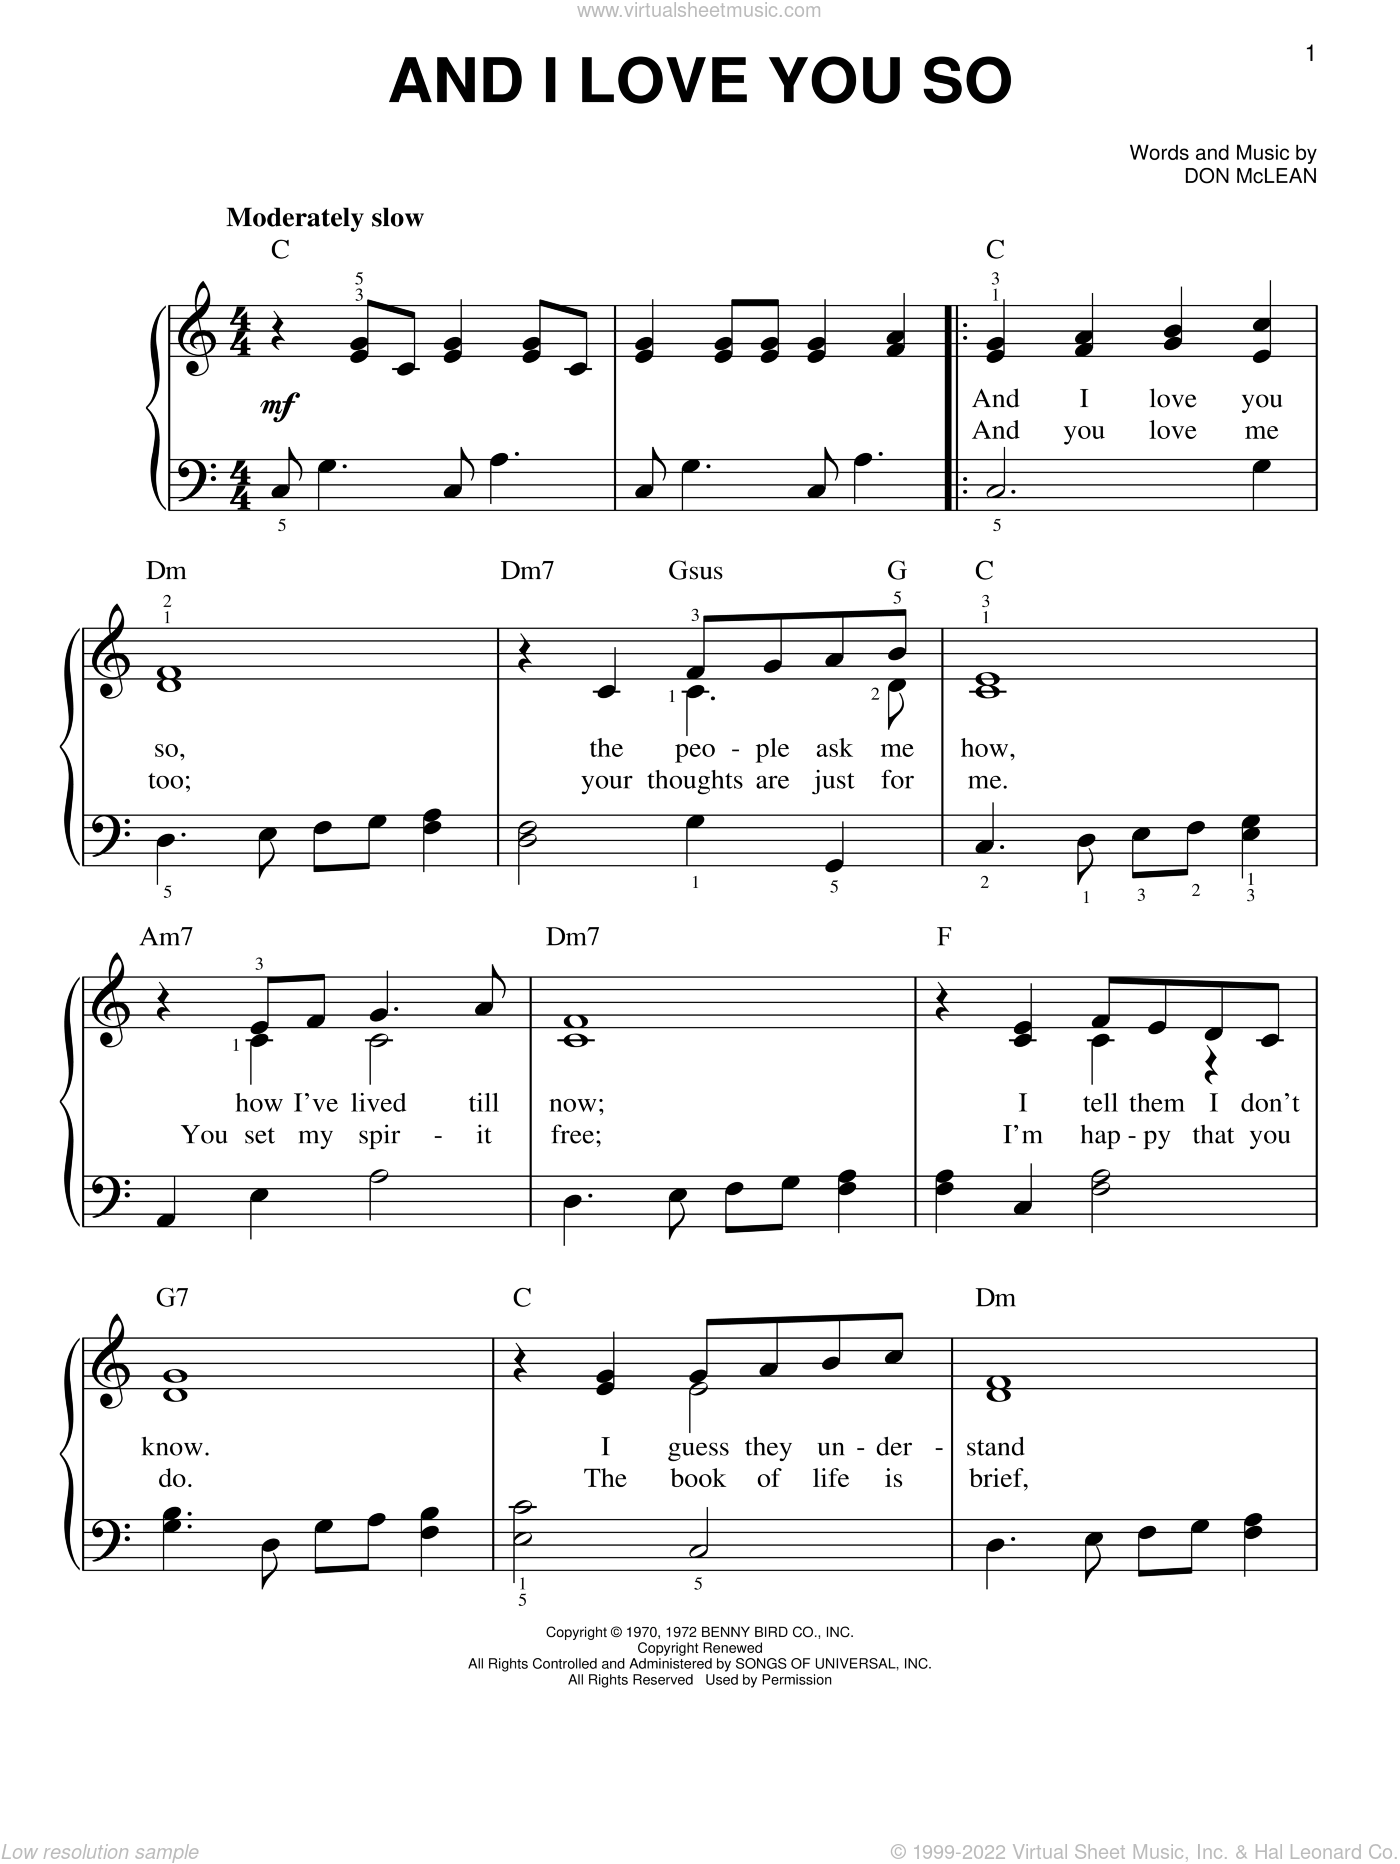 McLean - And I Love You So sheet music for piano solo [PDF]